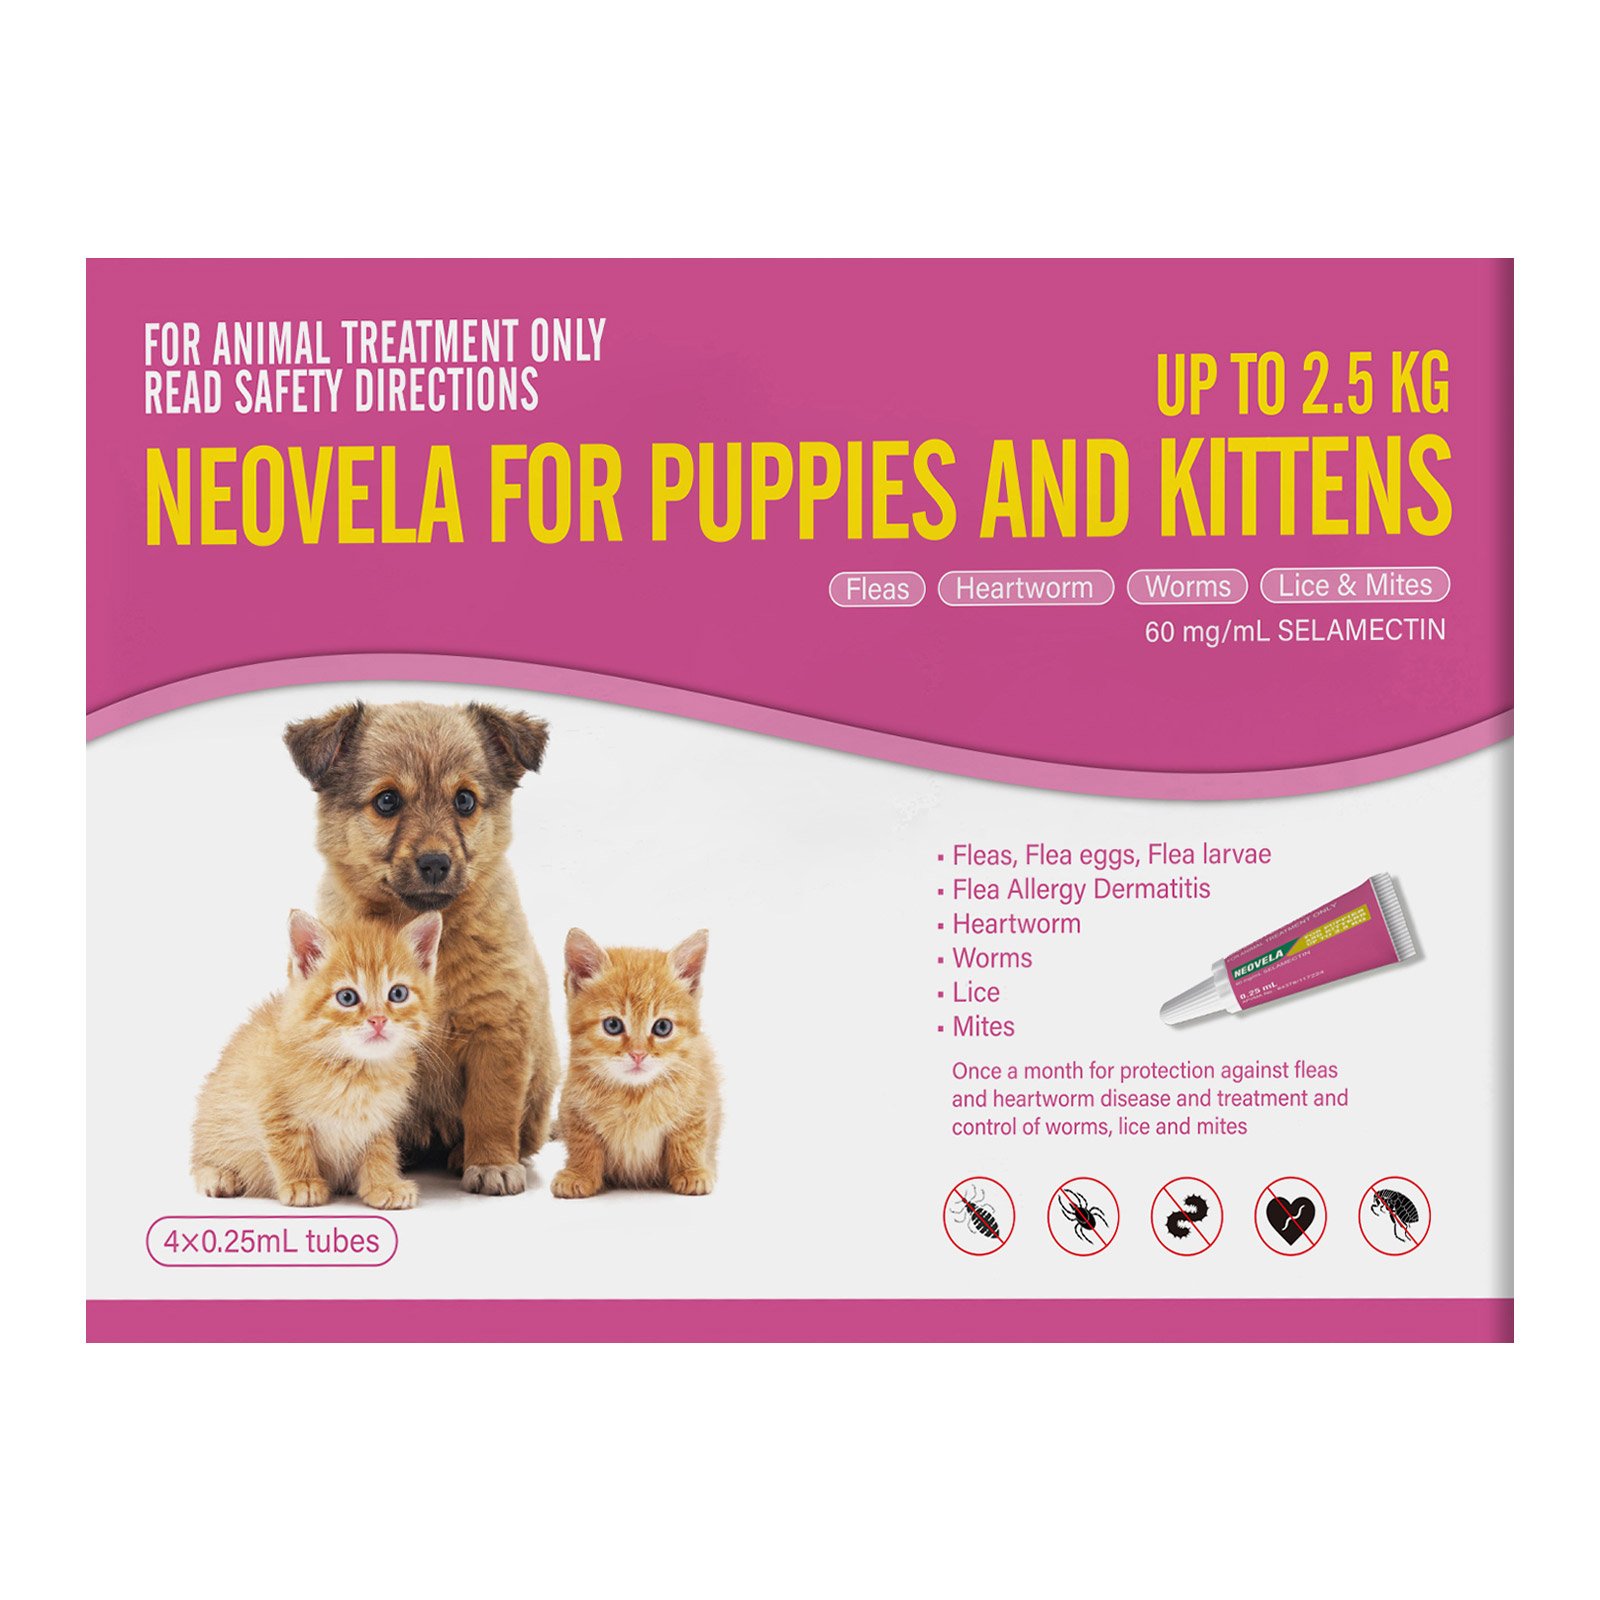 Neovela-for-puppies-and-kittens-up-to-2.5kg_08102023_041605.jpg